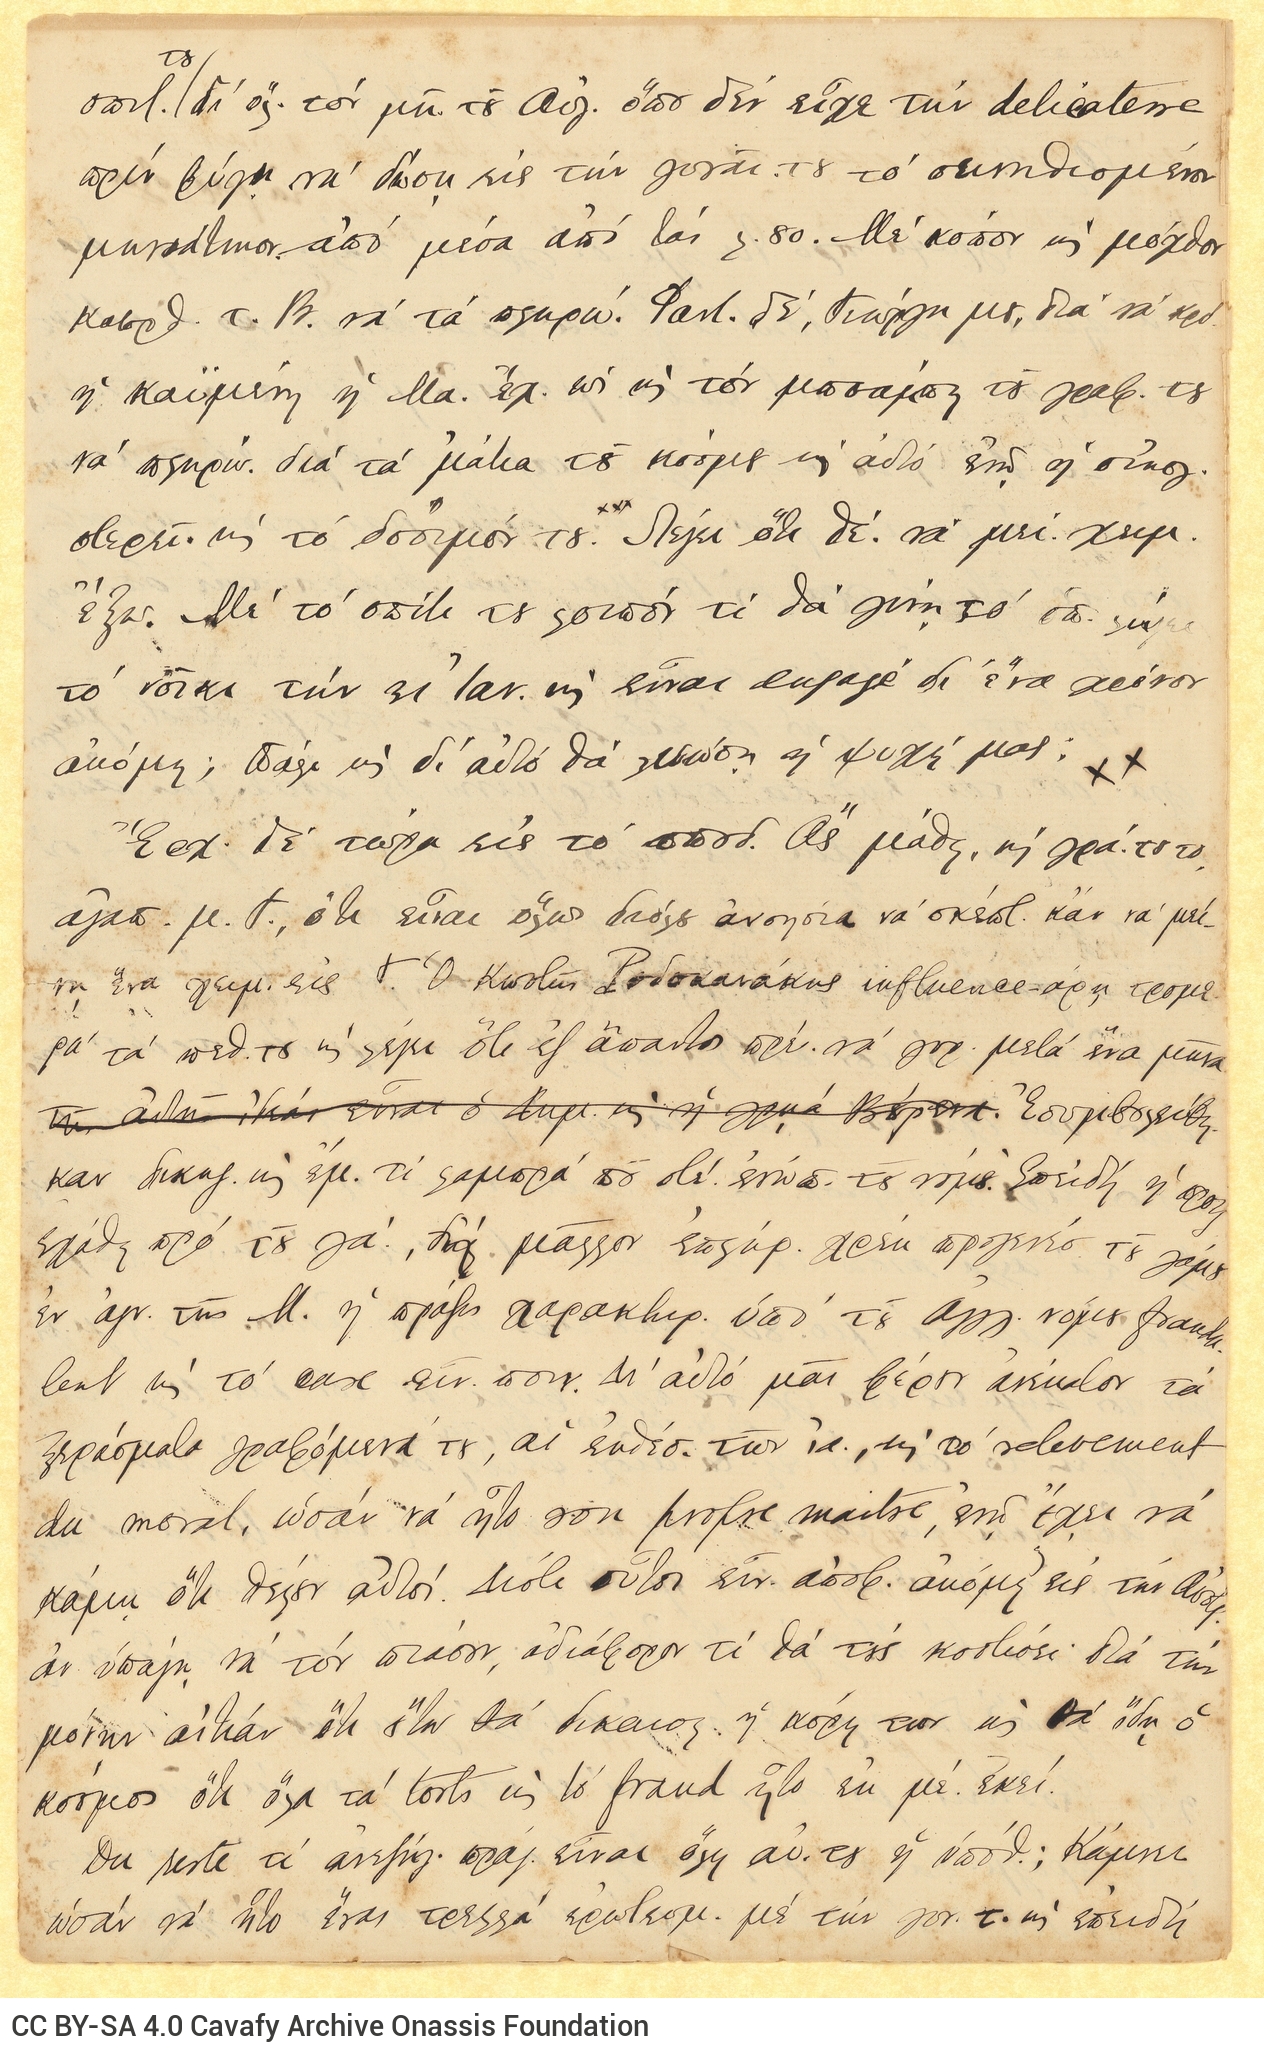 Handwritten draft letter by C. P. Cavafy to his brother George ("23 Sept.") from the 1889 correspondence series, on two sheet